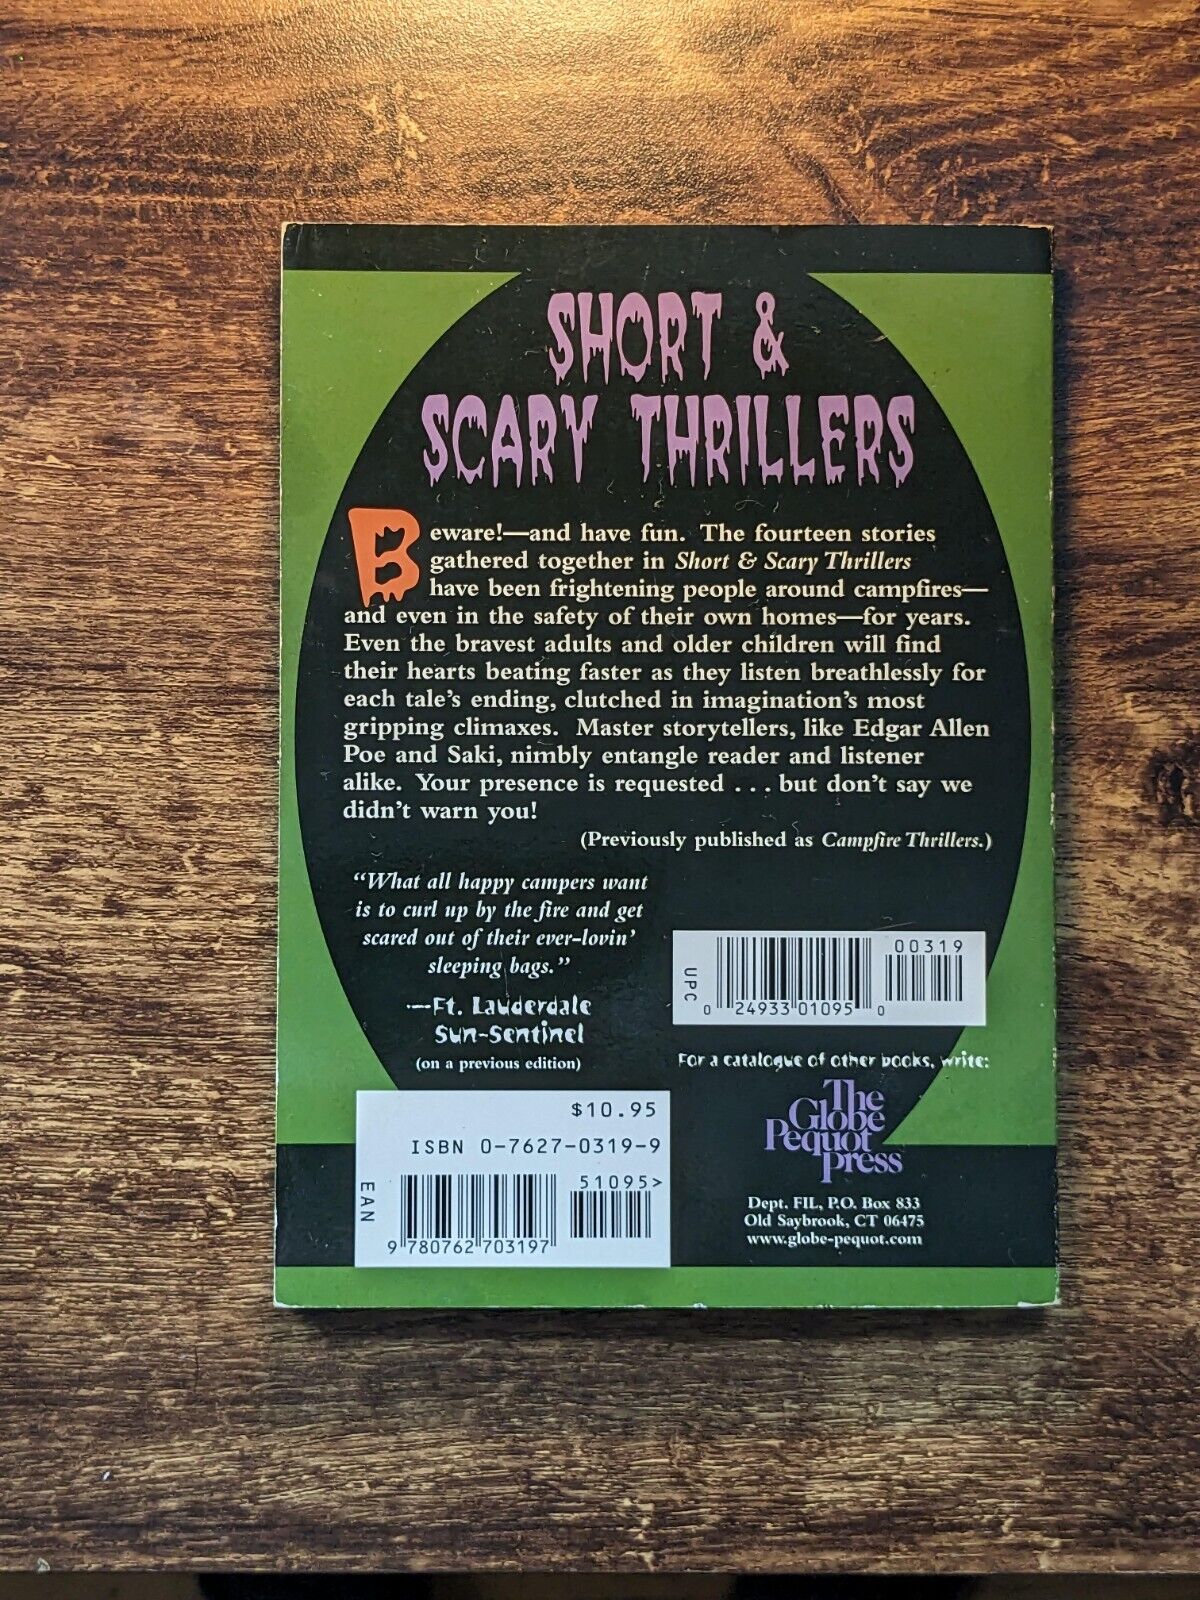 Short & Scary Thrillers (First Edition, 1998) by Rebecca Rizzo